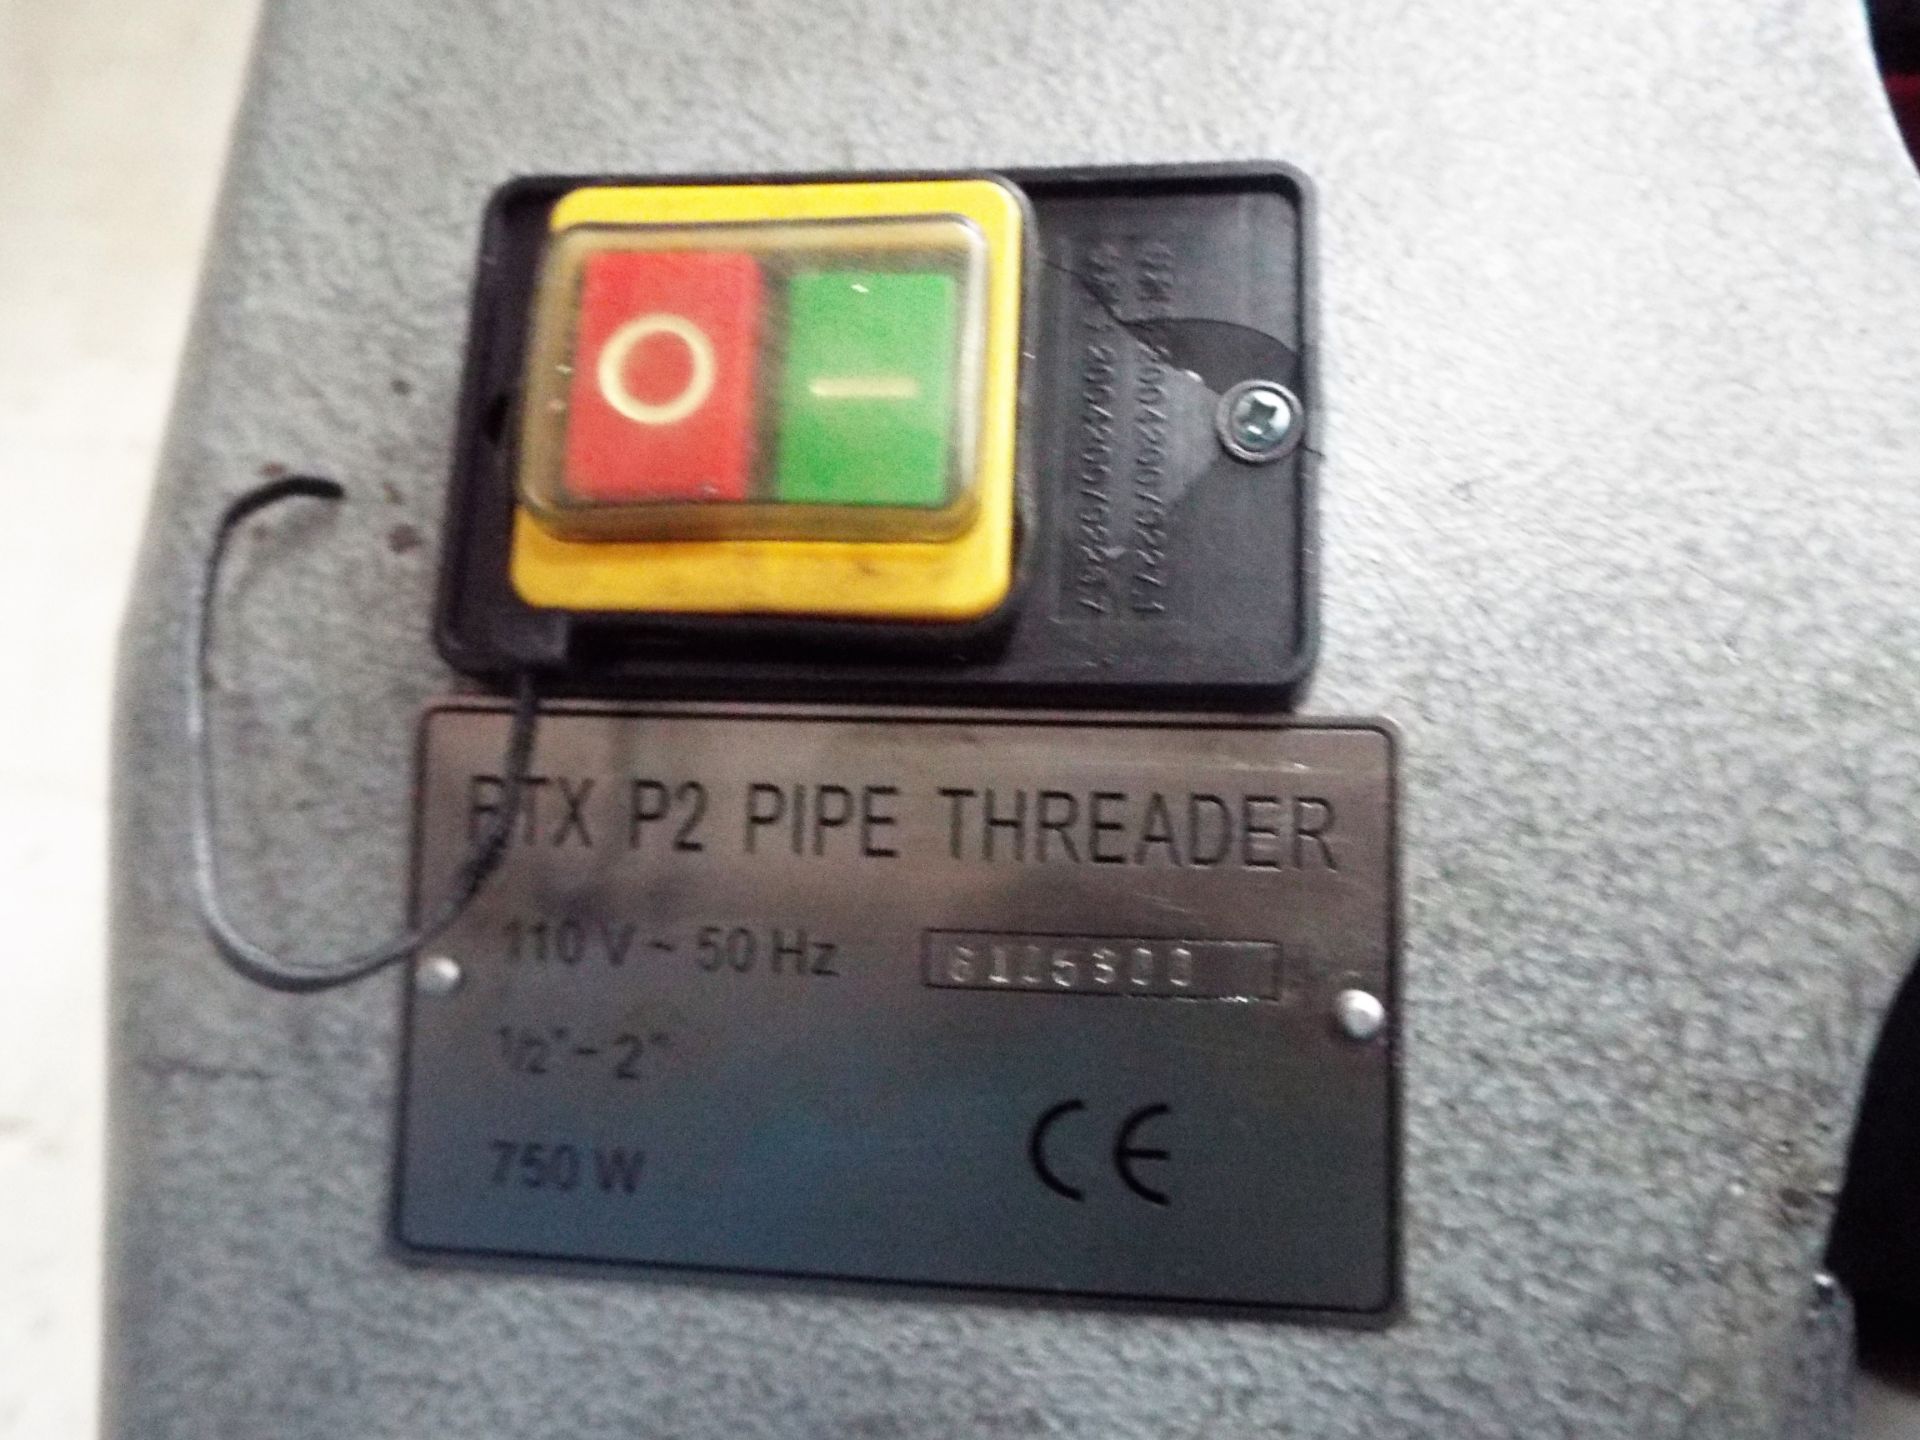 RTX Pipe Threading Machine cw Transformer & Spare Set of Legs. - Image 4 of 10